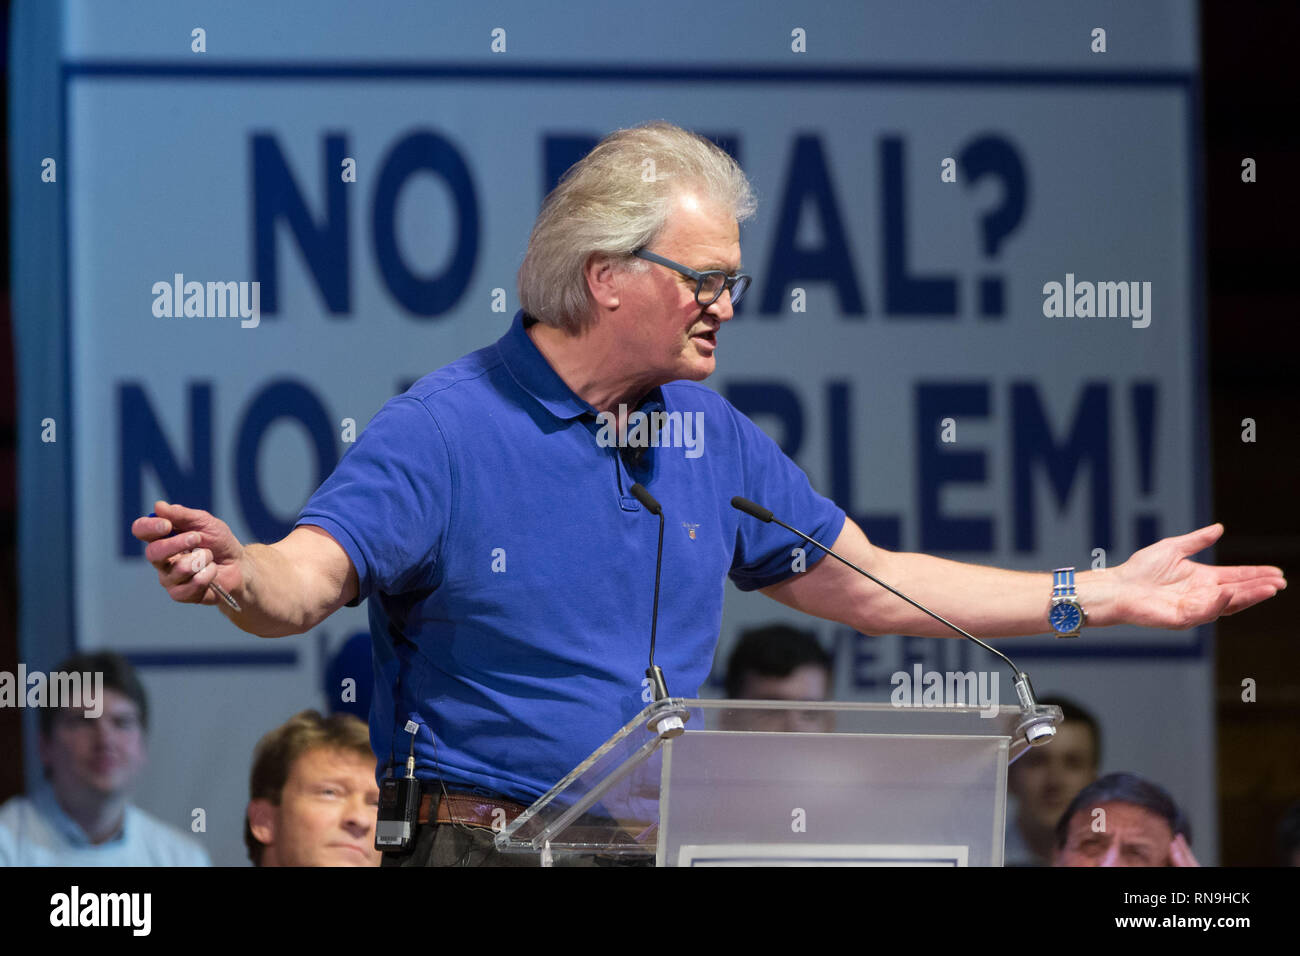 Leave Means Leave campaigners hold a Let's Go WTO rally at the Central Methodists Hall  Featuring: Tim Martin Where: London, United Kingdom When: 17 Jan 2019 Credit: Wheatley/WENN Stock Photo